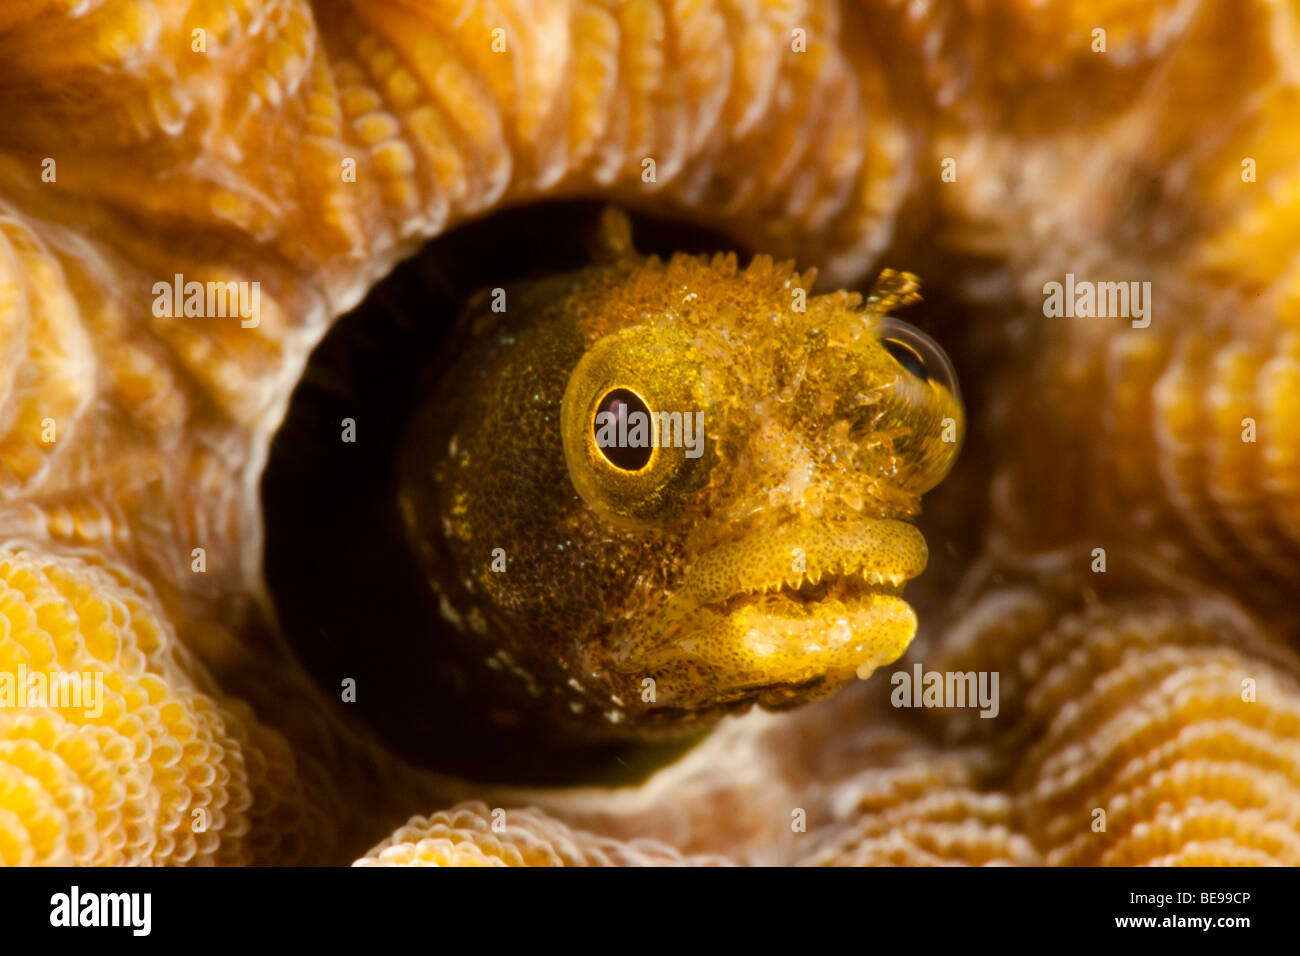 Spinyhead blenny, Acanthemblemaria spinosa, in hard coral, Netherlands Antilles, Bonaire, Caribbean. Stock Photo